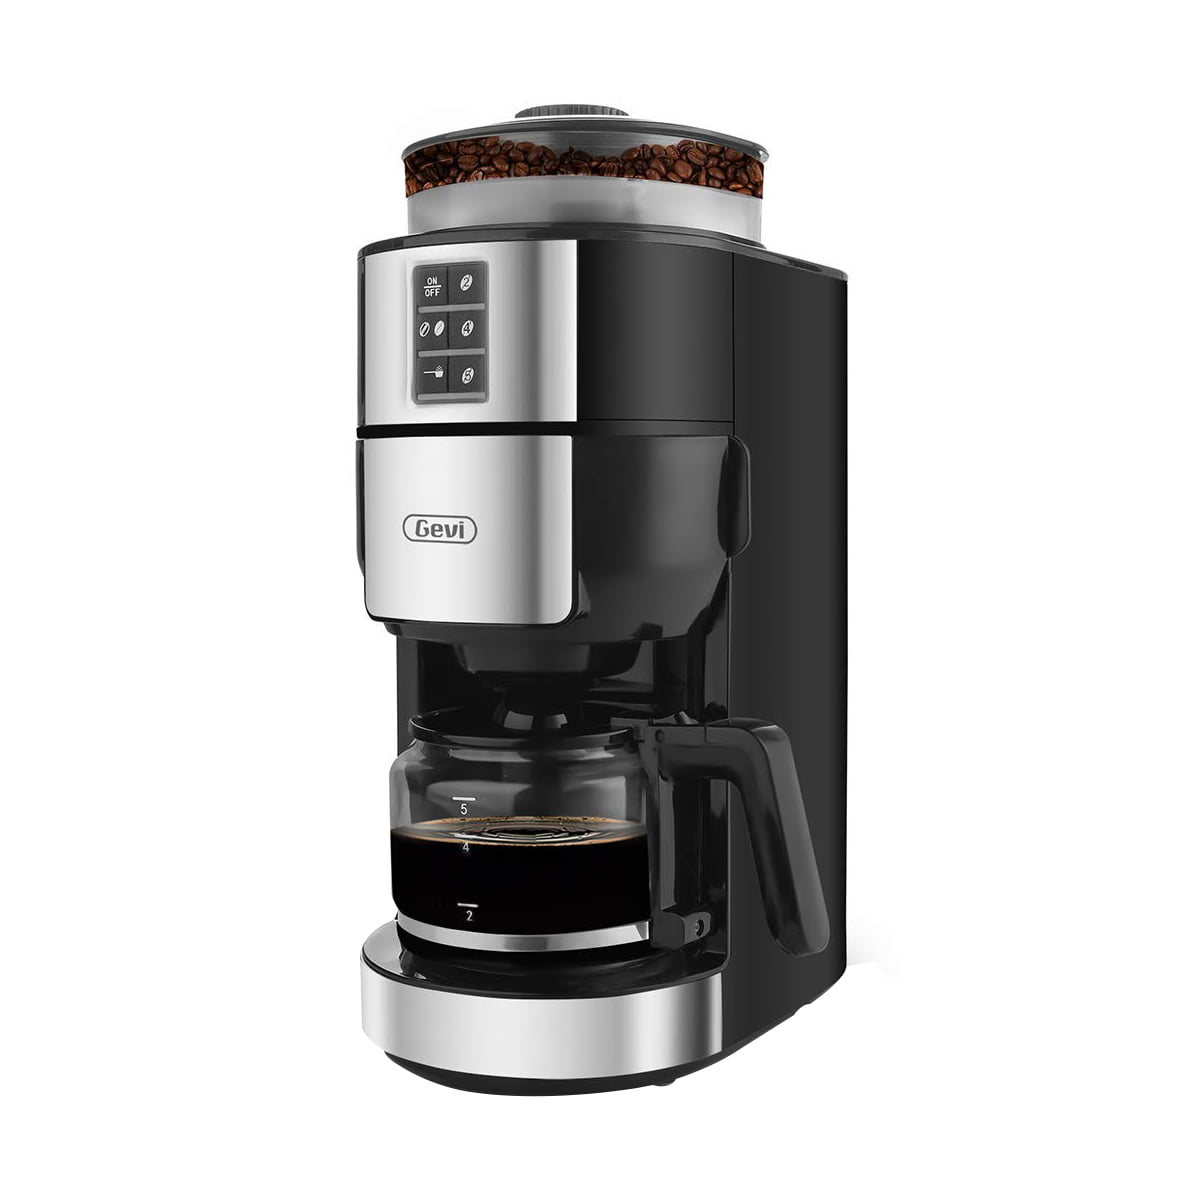 Grind and Brew Coffee Maker with BuiltIn Burr Coffee